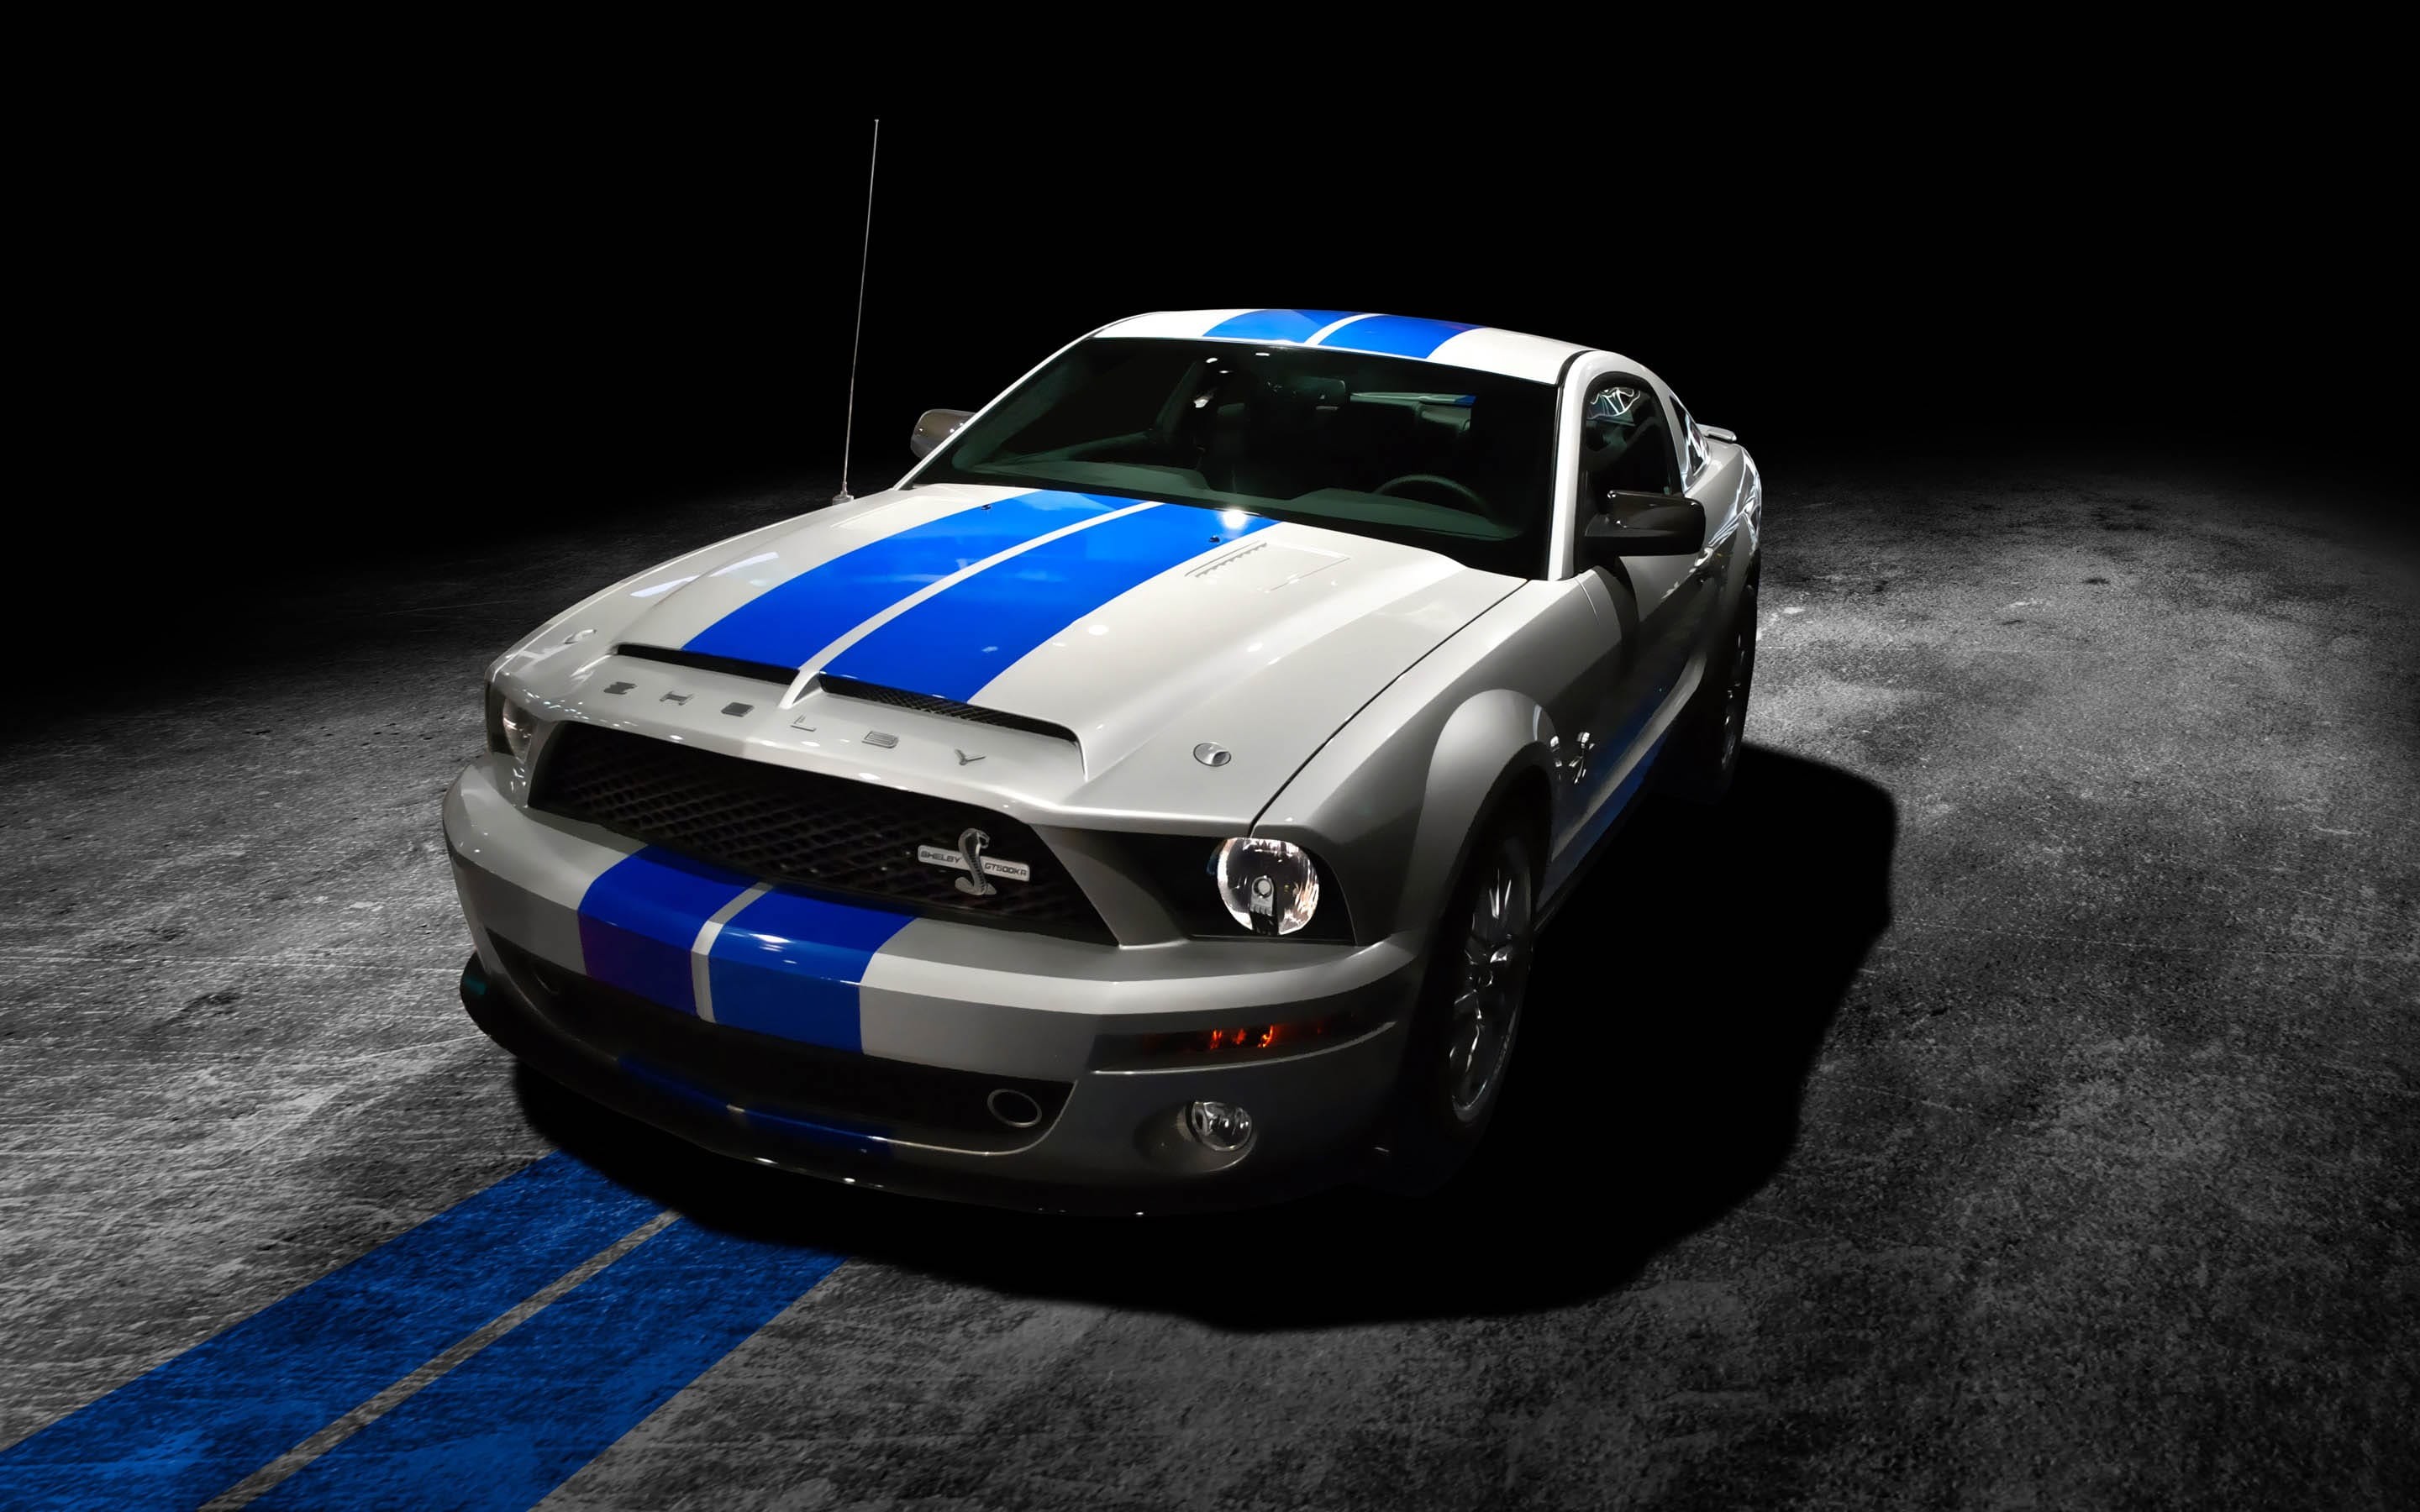 2880x1800 Ford Mustang Shelby Cobra Gt500 Wallpaper - Image #3365 -